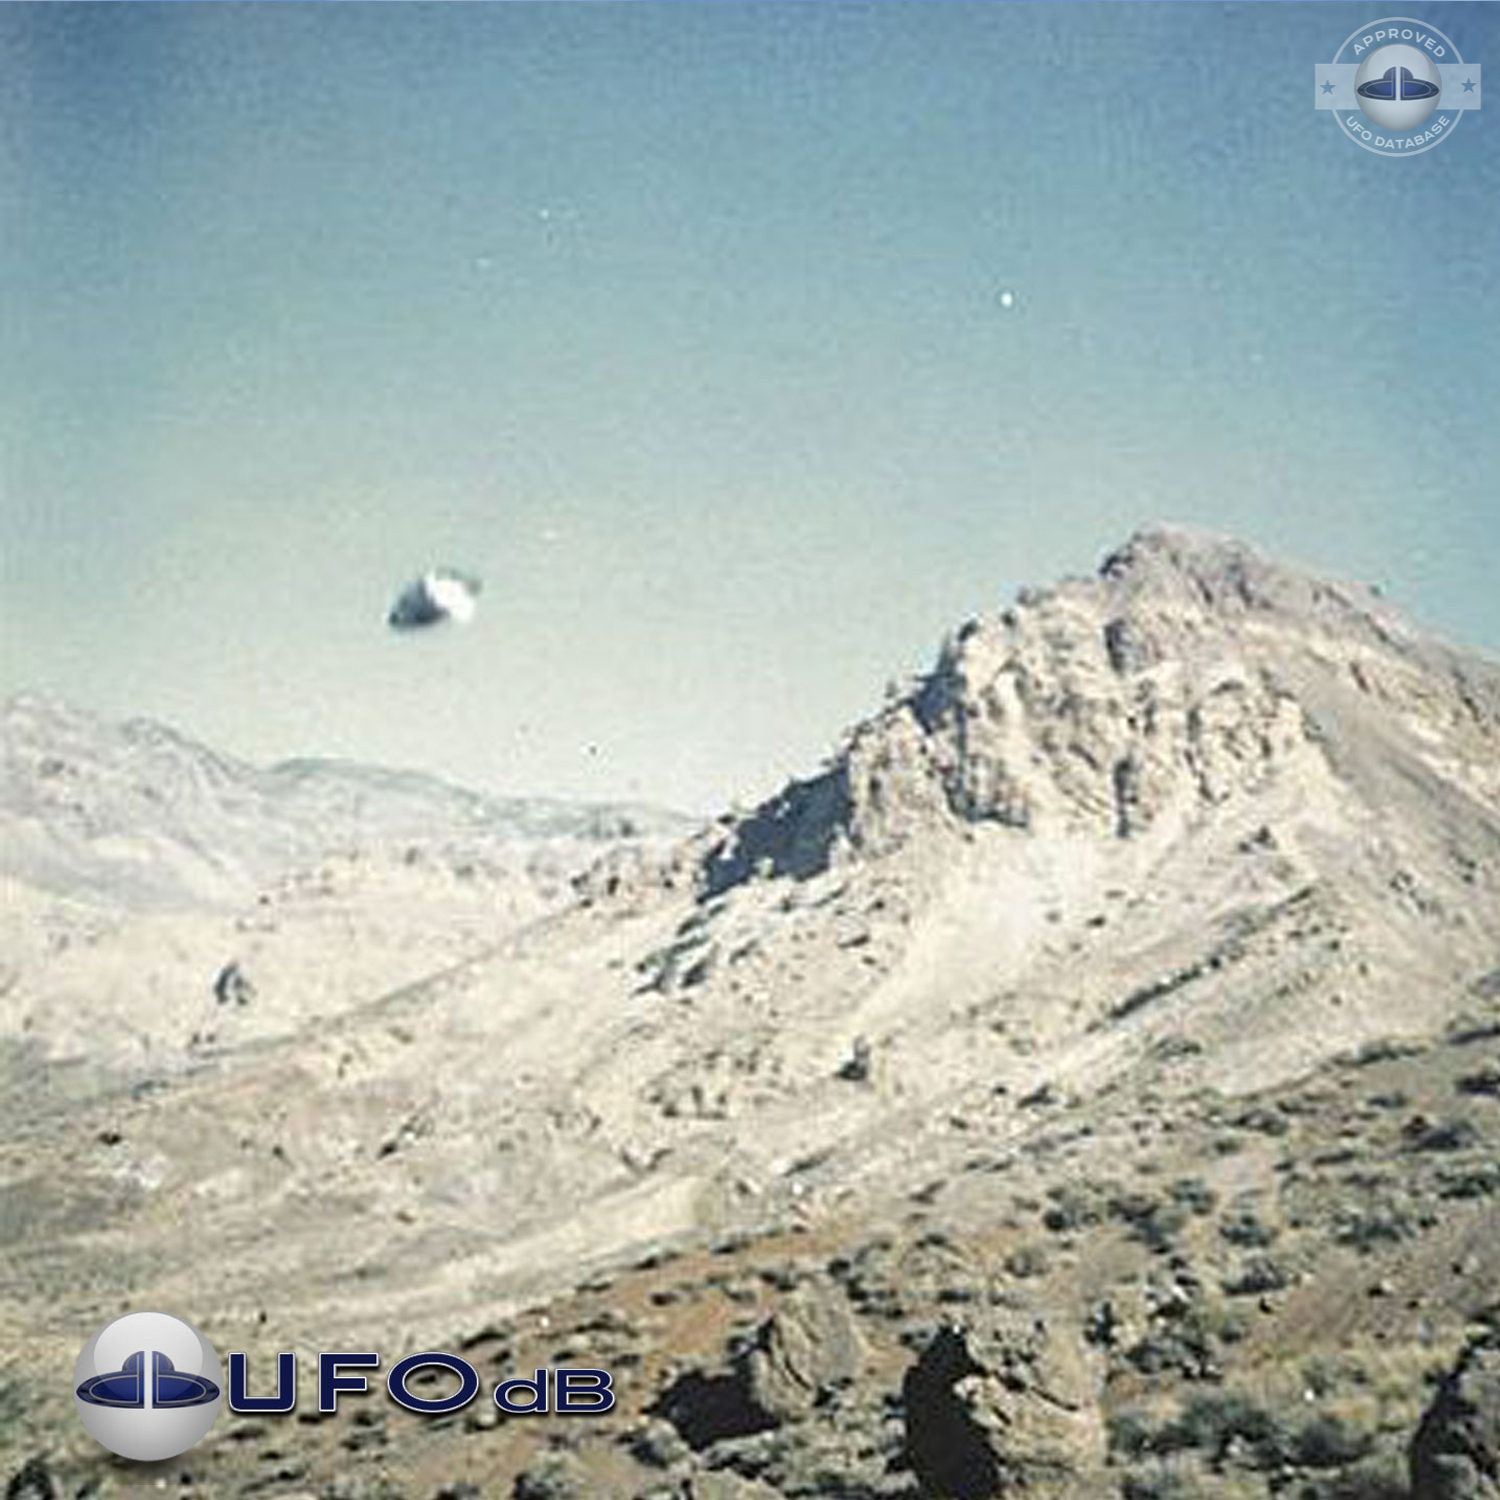 UFO pictures - UFO over mountains in the state of New Mexico UFO Picture #8-1